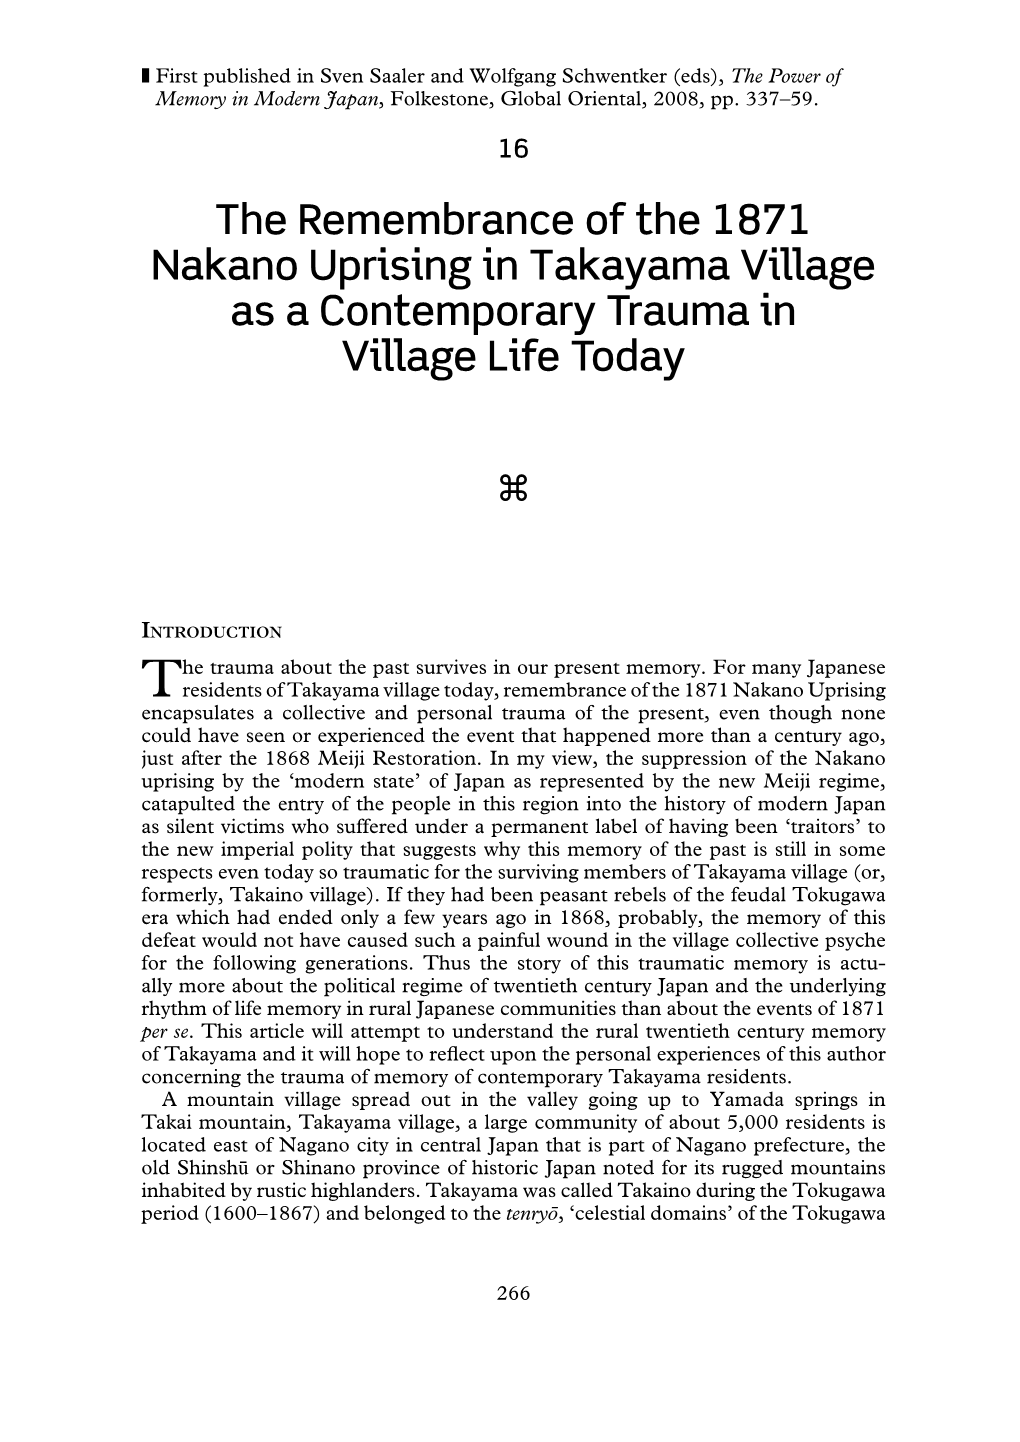 The Remembrance of the 1871 Nakano Uprising in Takayama Village As a Contemporary Trauma in Village Life Today